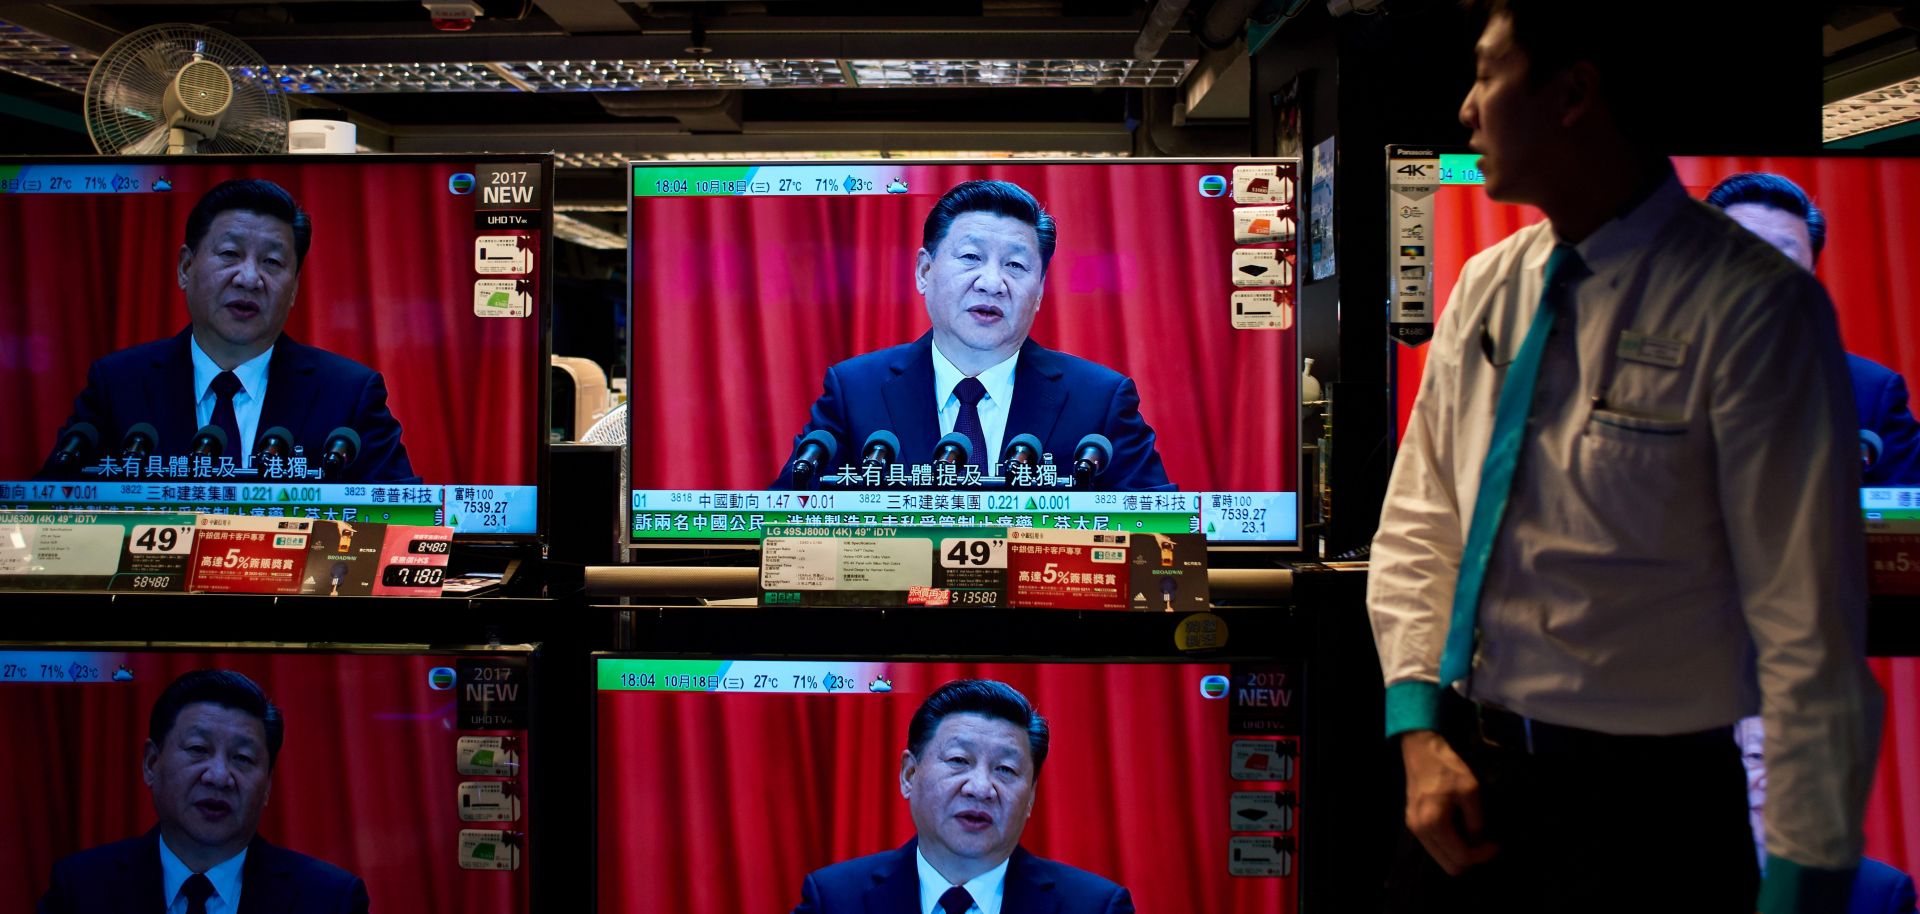 Televisions on display at an electronics store in Hong Kong are all tuned to Chinese President Xi Jinping's address to the 19th Chinese Communist Party Congress on Oct. 18, 2017.